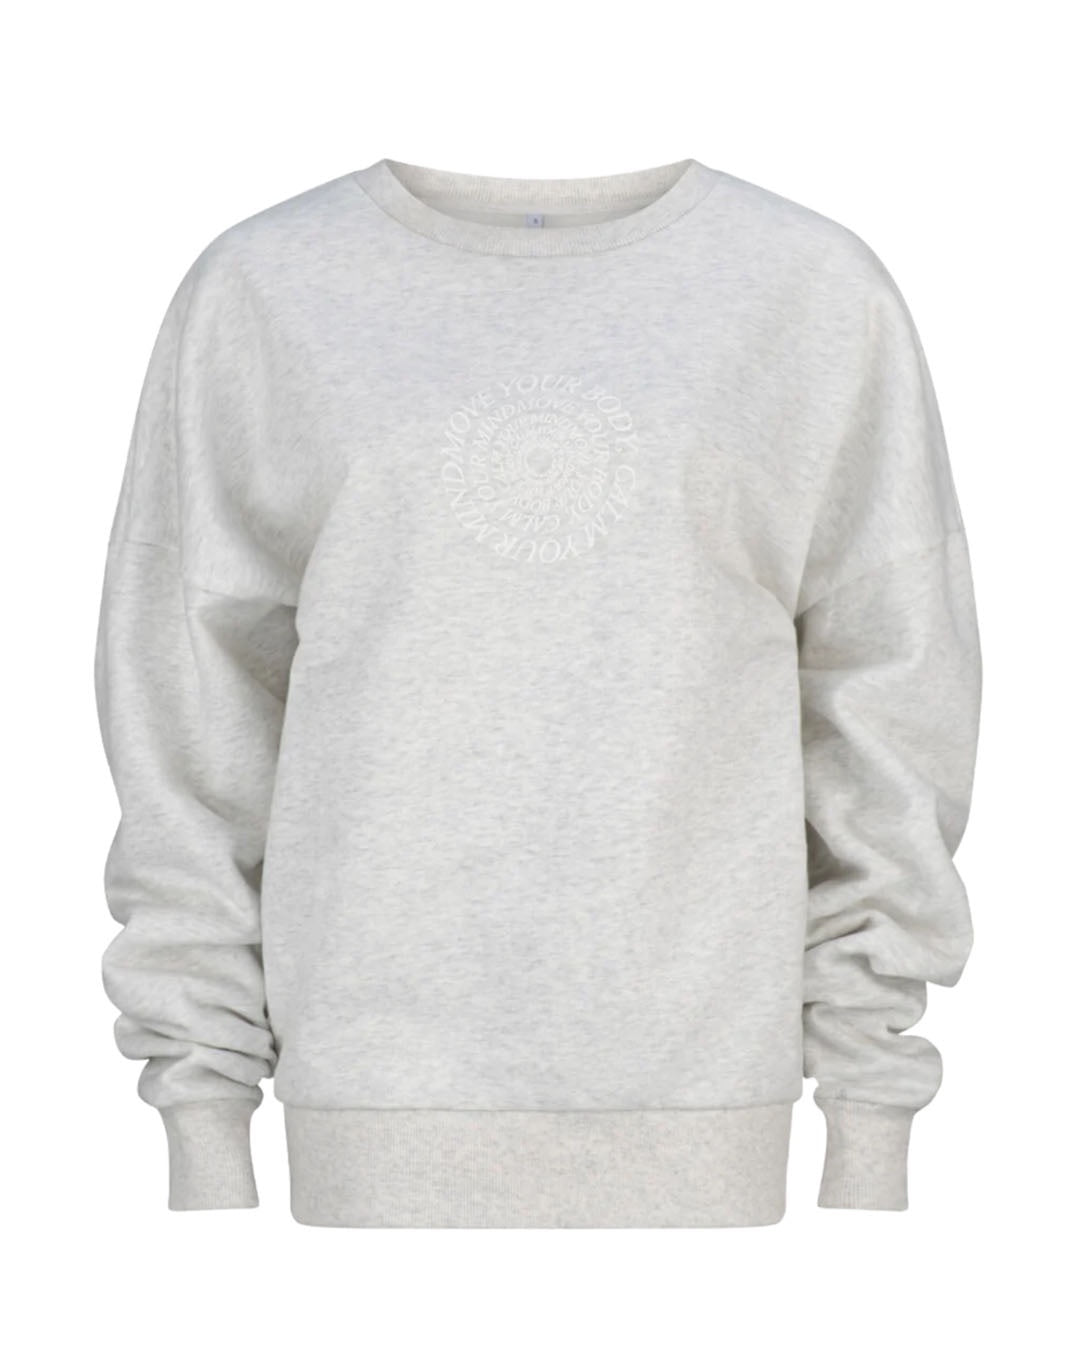 Move Your Body Crewneck Jumpers & Sweats by Pinky & Kamal - Prae Store